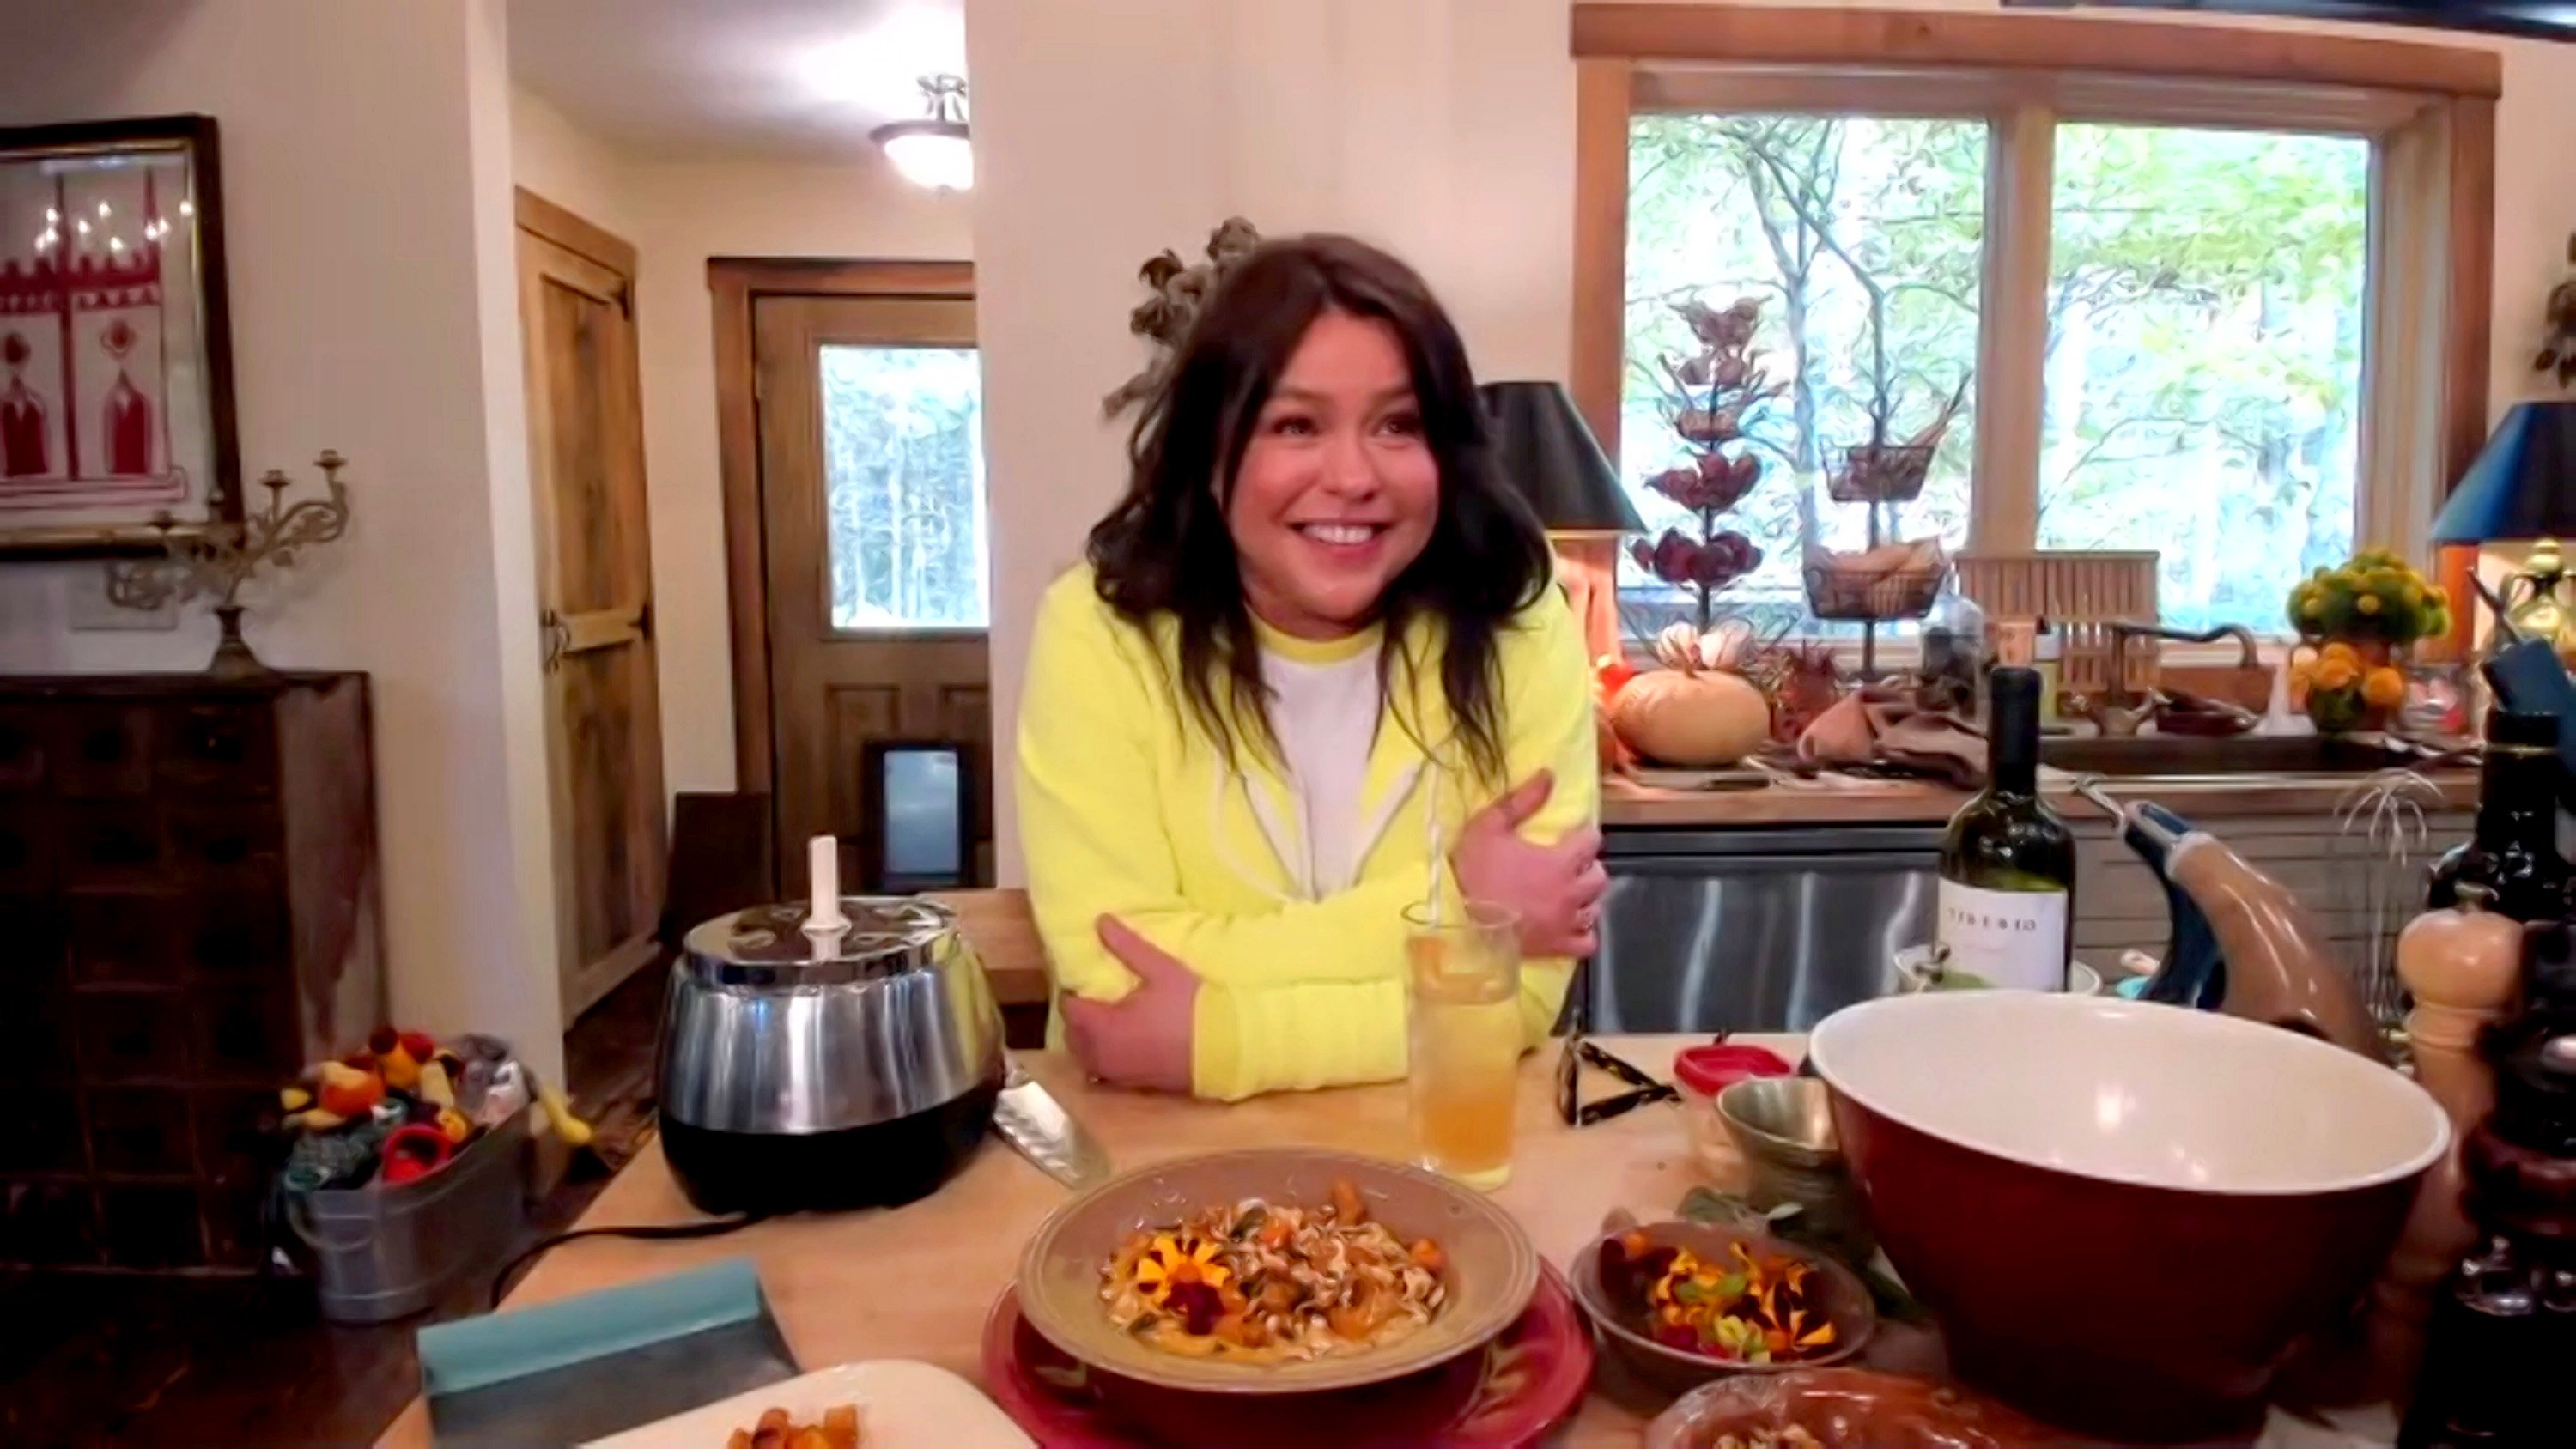 Rachael Ray poses during Food Network's 'In the Kitchen With Rachael Ray' in a sunny yellow sweater, while leaning on her kitchen counter.